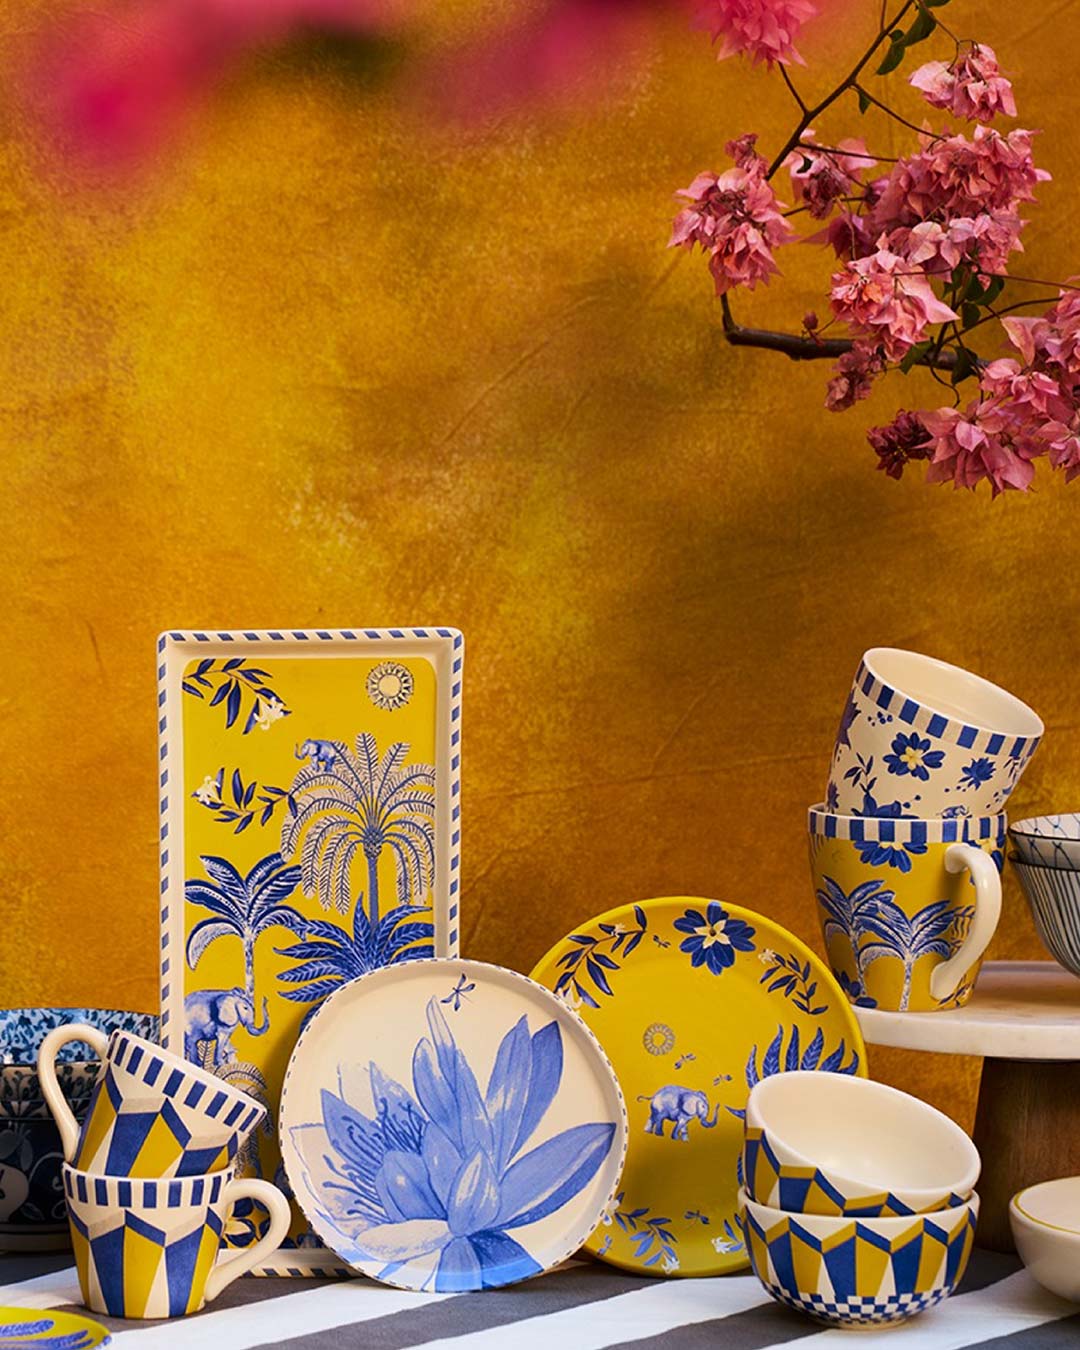 Painted ceramic mugs, plates and bowls stacked in front of an ochre wall with a pink flowering branch in the top right corner, in Nicobar boutique in Mumbai.